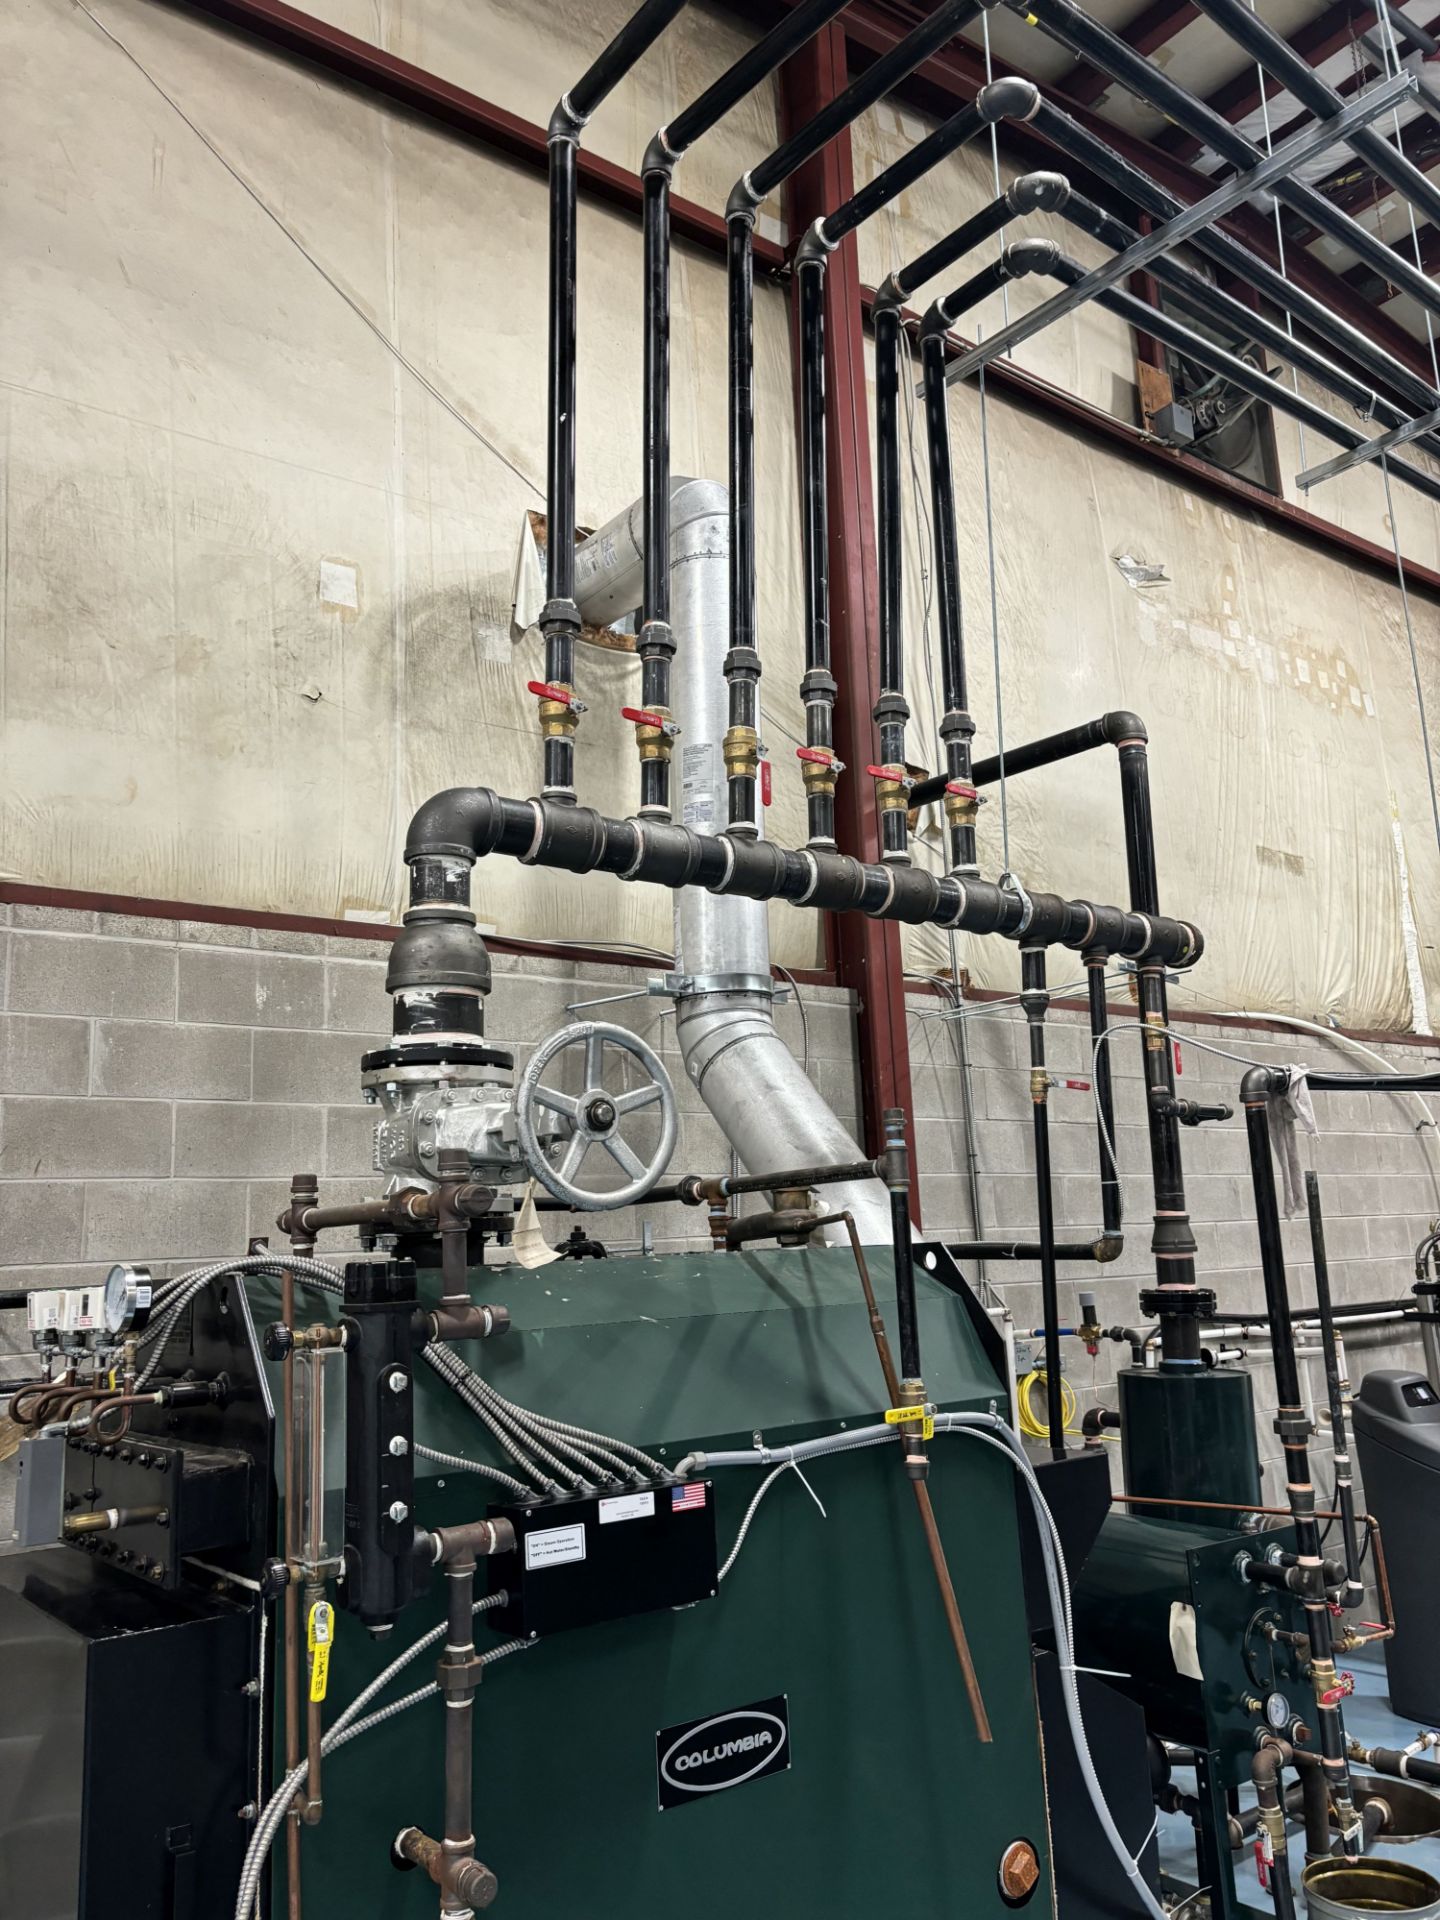 60HP COLUMBIA STEAM BOILER - LOW PRESSURE SYSTEM WITH CRN & NAT'L BD # - NATURAL GAS - MODEL MPH-60 - Image 9 of 18